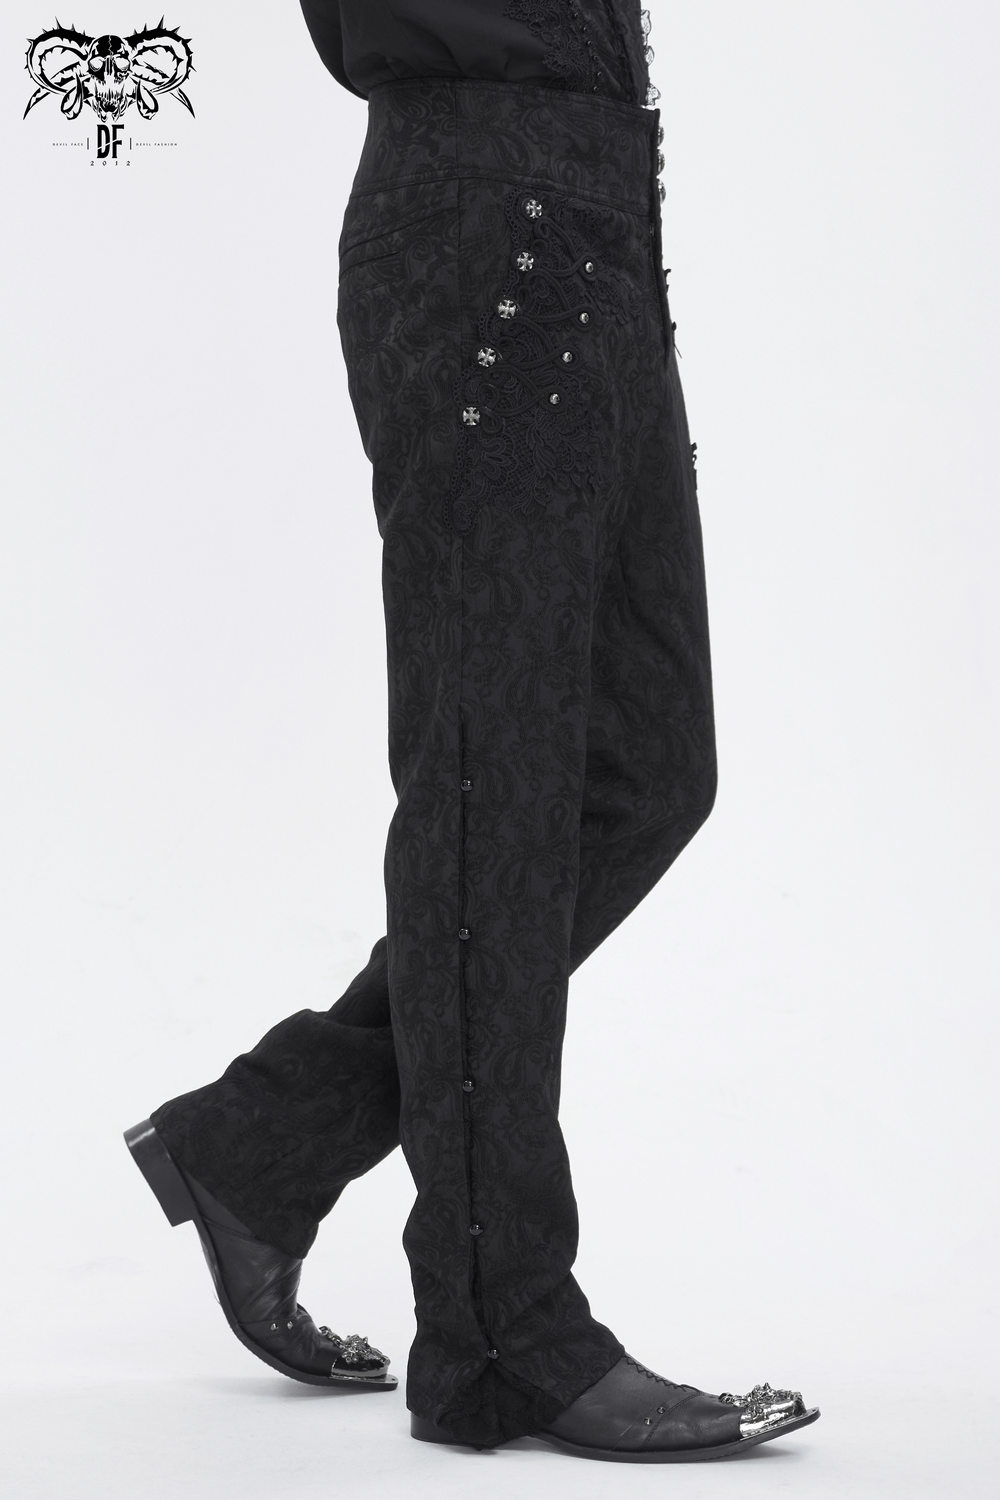 Exquisite Black Floral Embroidered Trousers with Lace